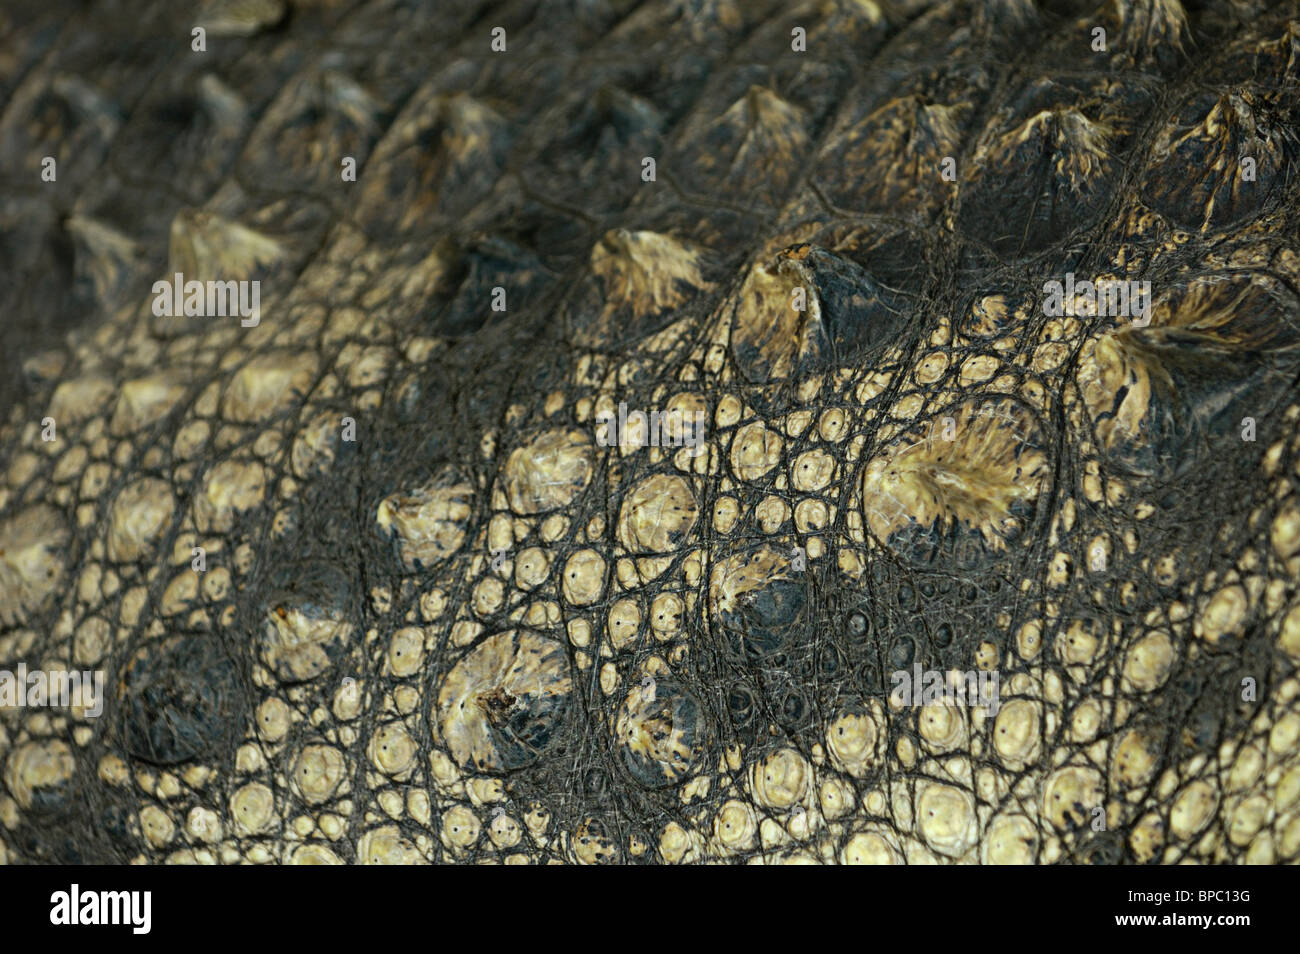 Close-up of crocodile skin abstract organic texture background Stock Photo